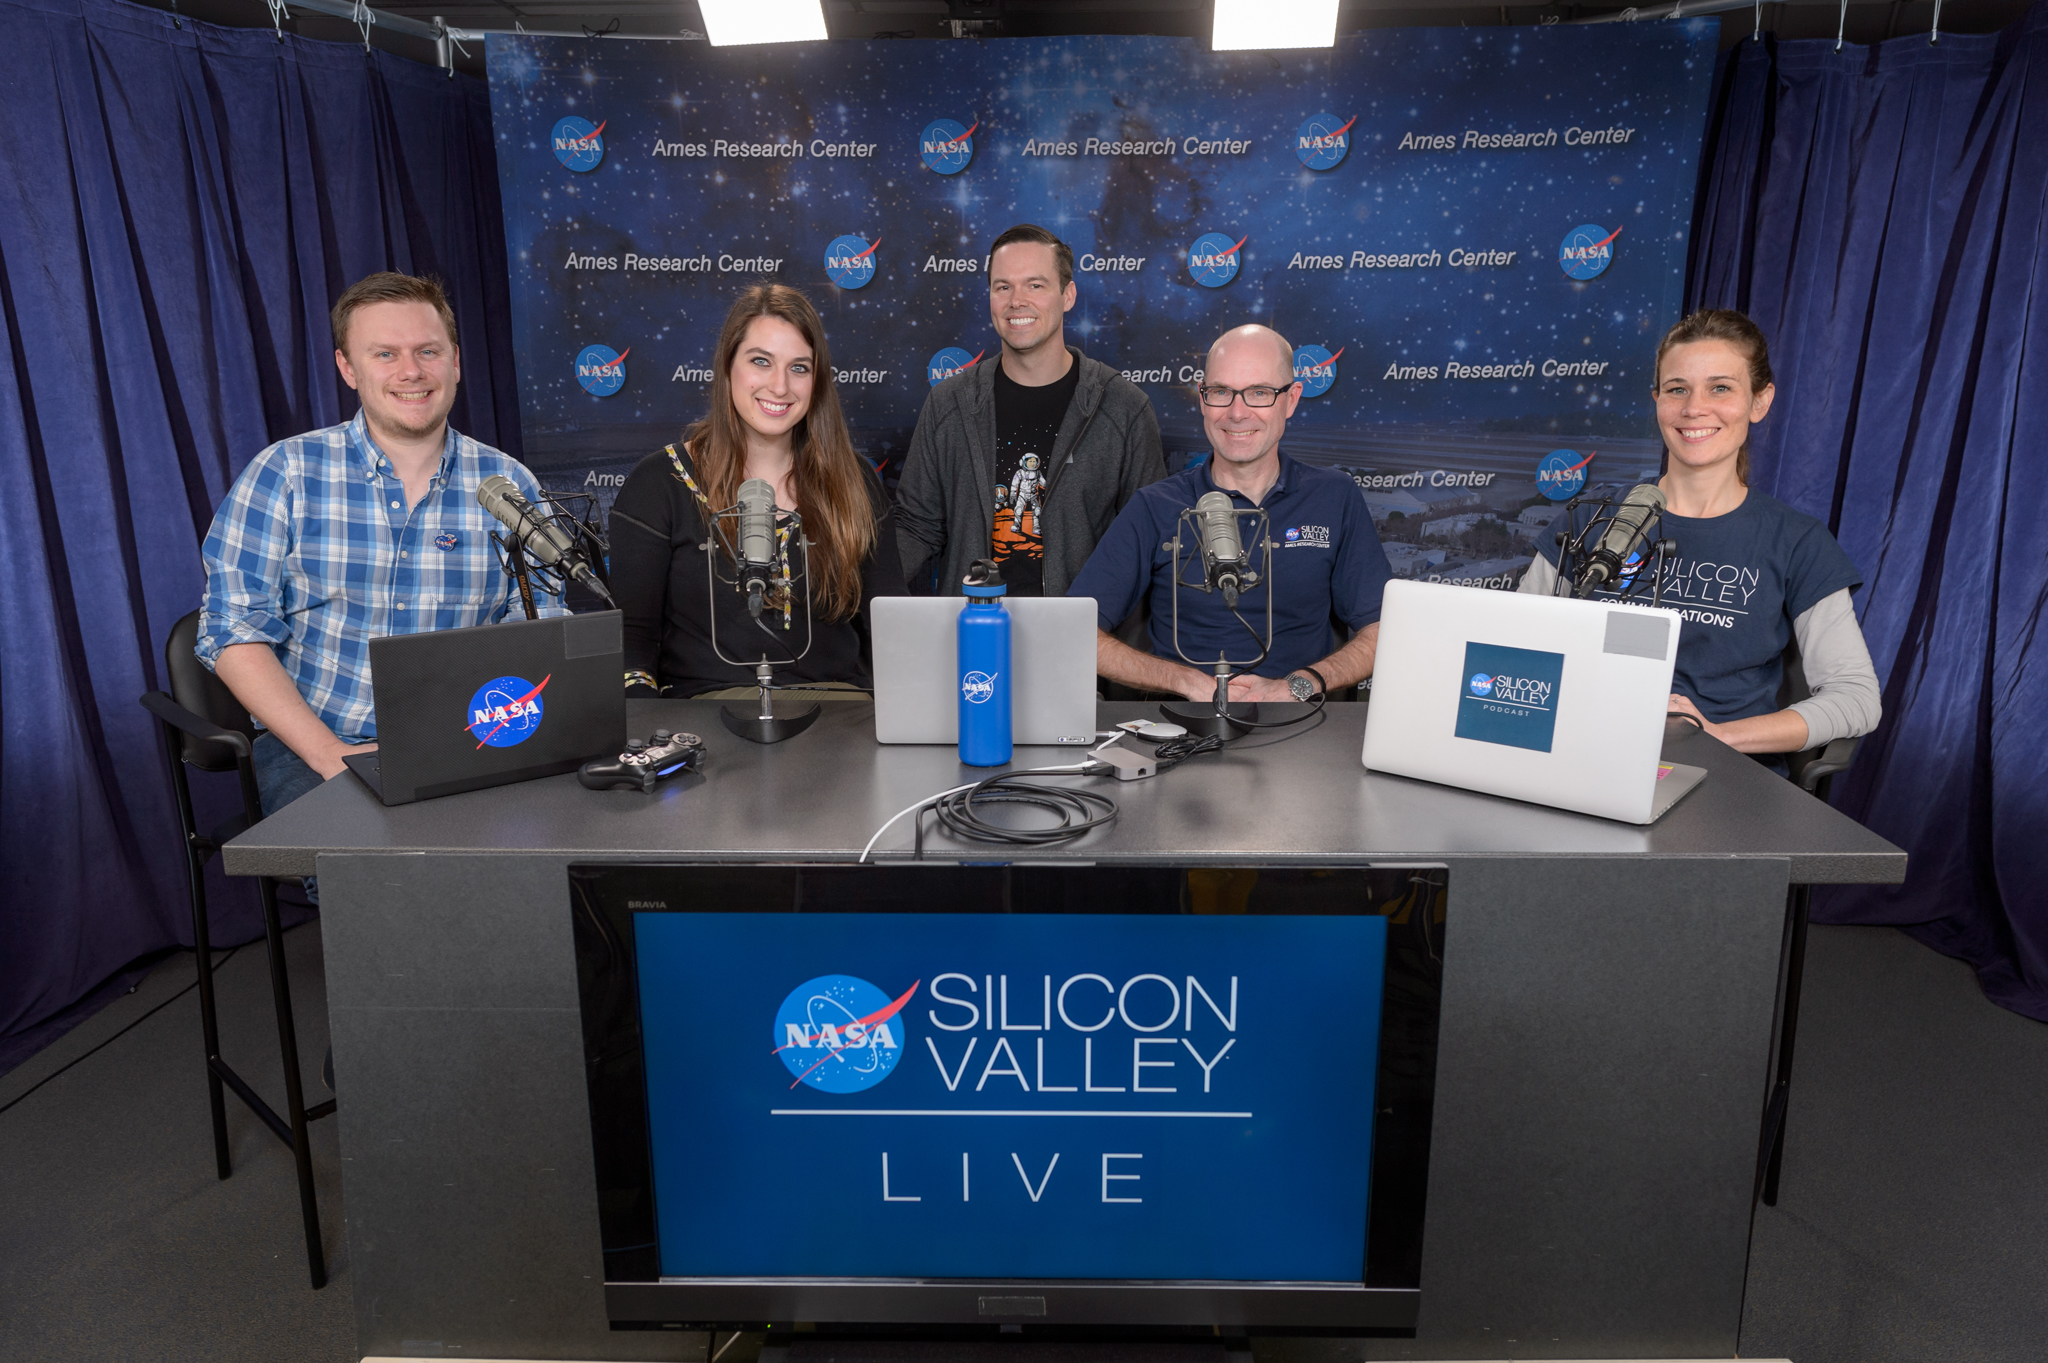 NASA in Silicon Valley Live Ep. 3 “Let's Play Space Video Games”